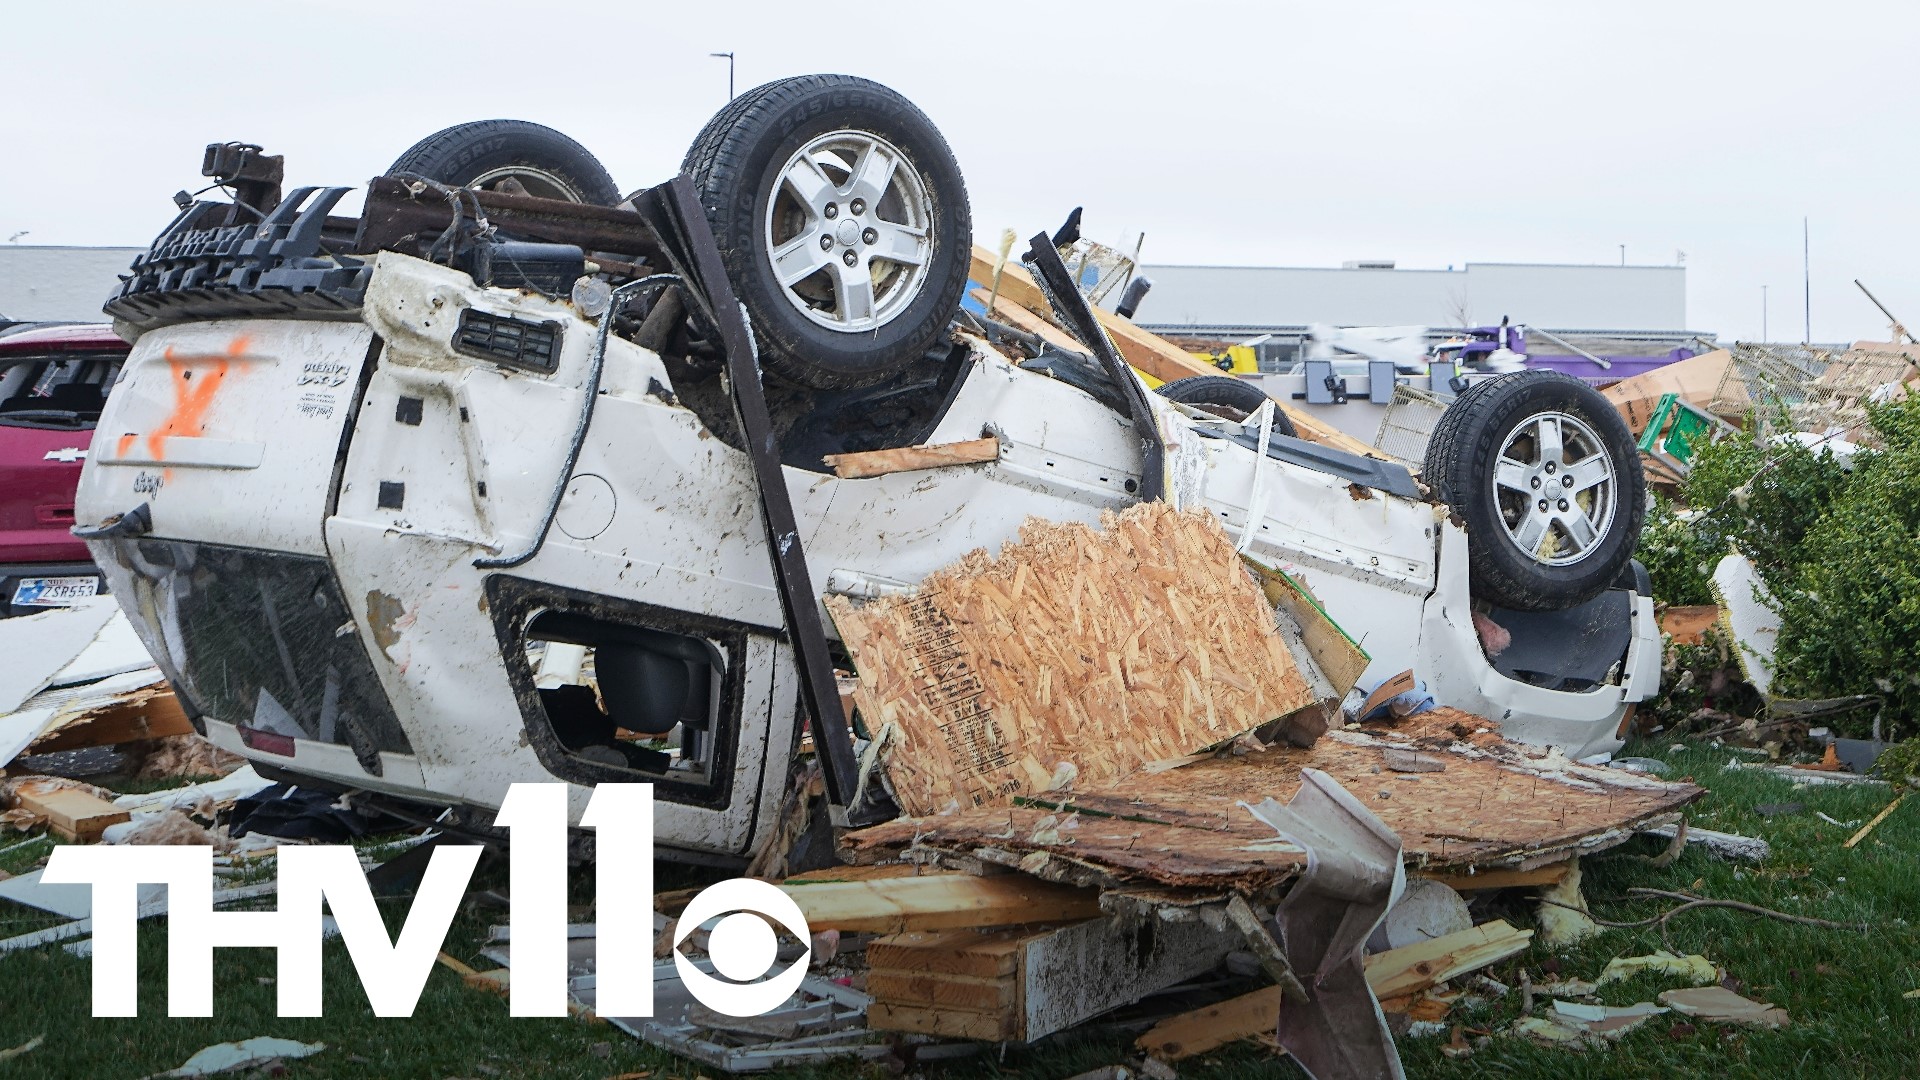 Thursday night’s storms left trails of destruction across parts of Ohio, Kentucky, Indiana and Arkansas. Tornadoes were also suspected in Illinois and Missouri.